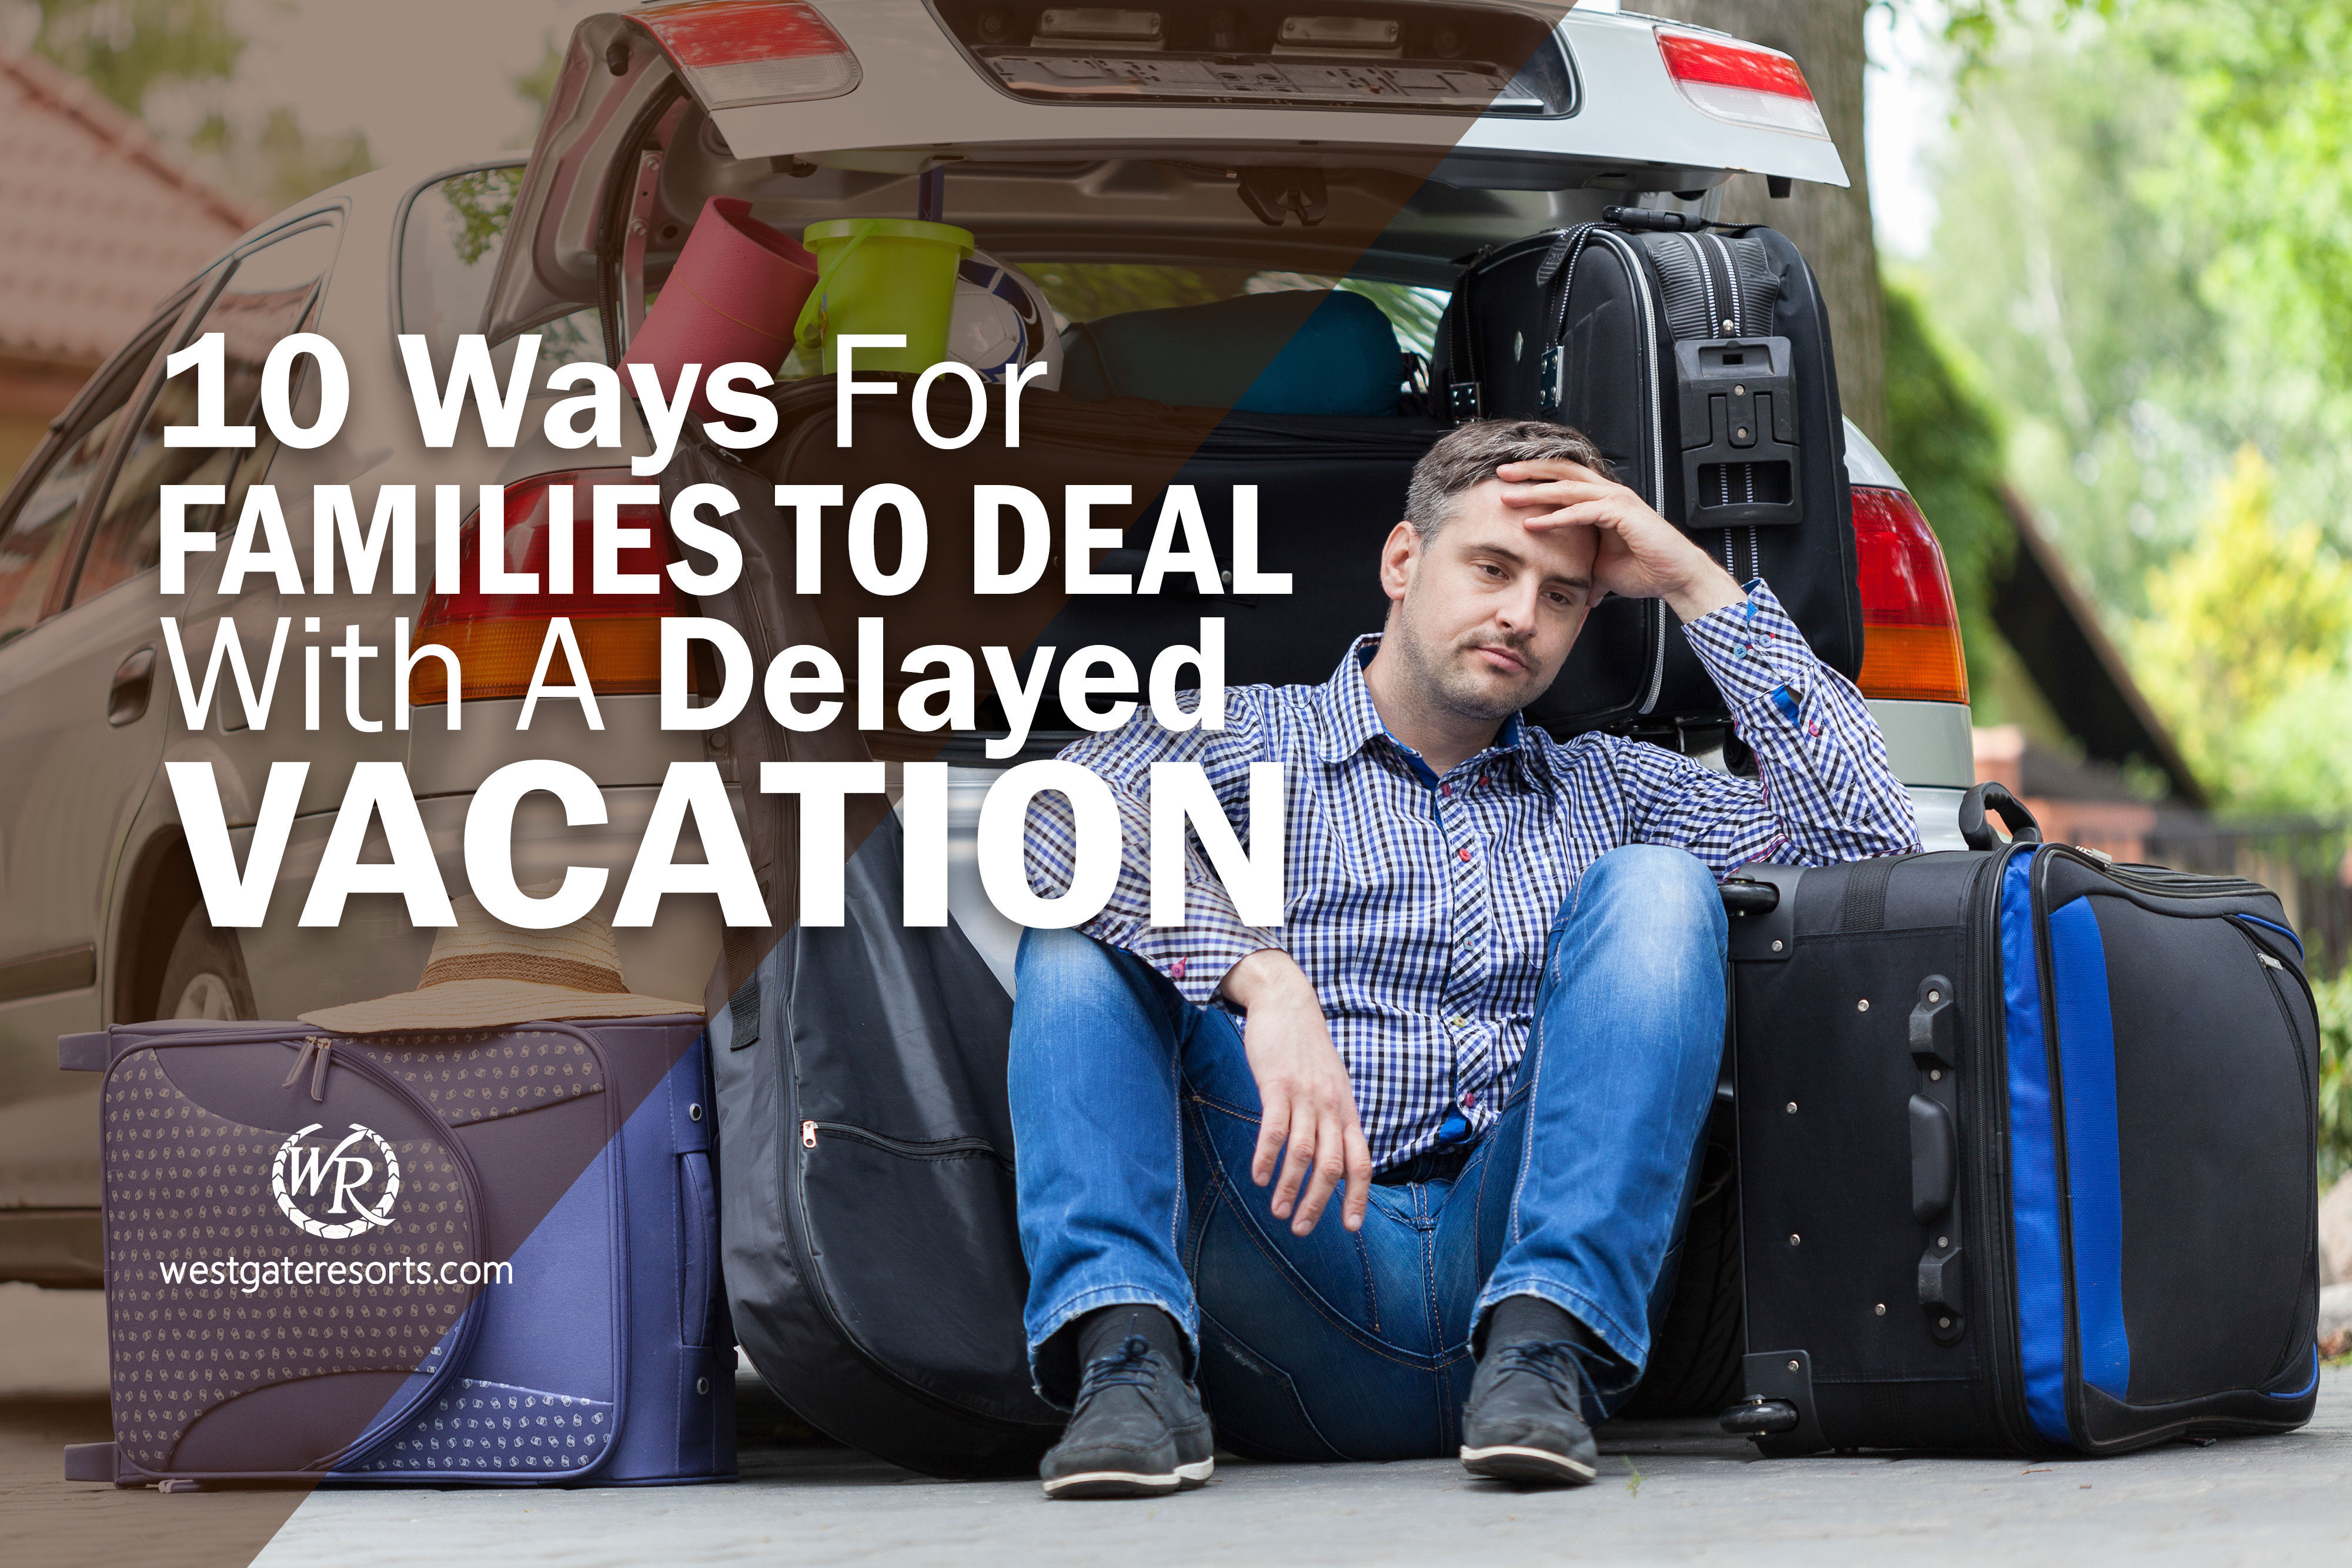 10 Ways For Families To Deal With A Delayed Vacation